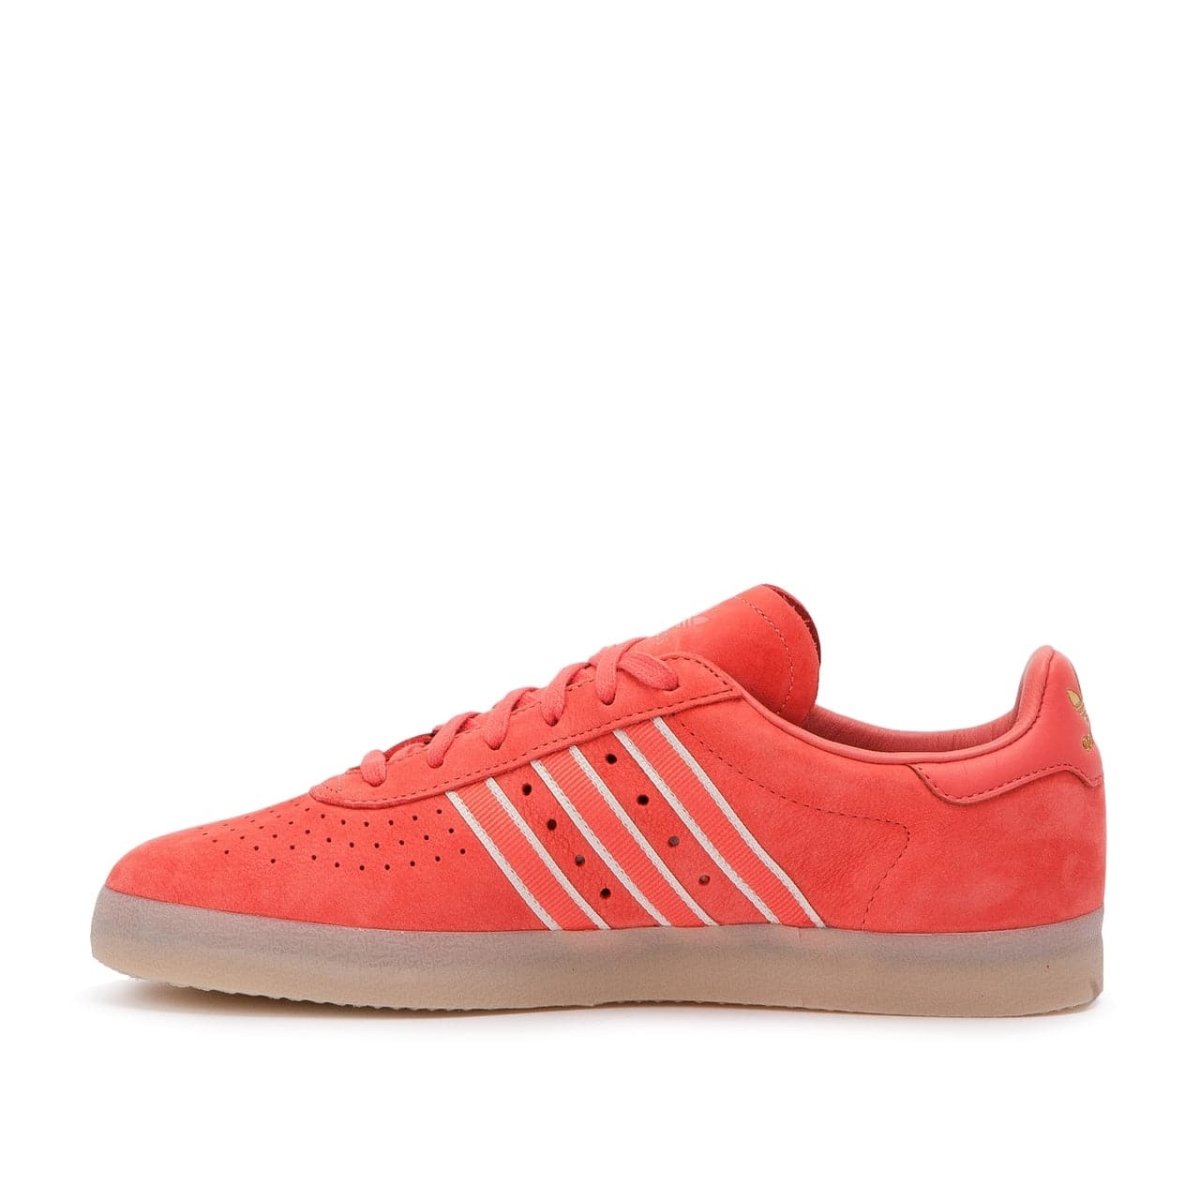 adidas  x Oyster 350 (Rot / Weiß / Gold)  - Allike Store